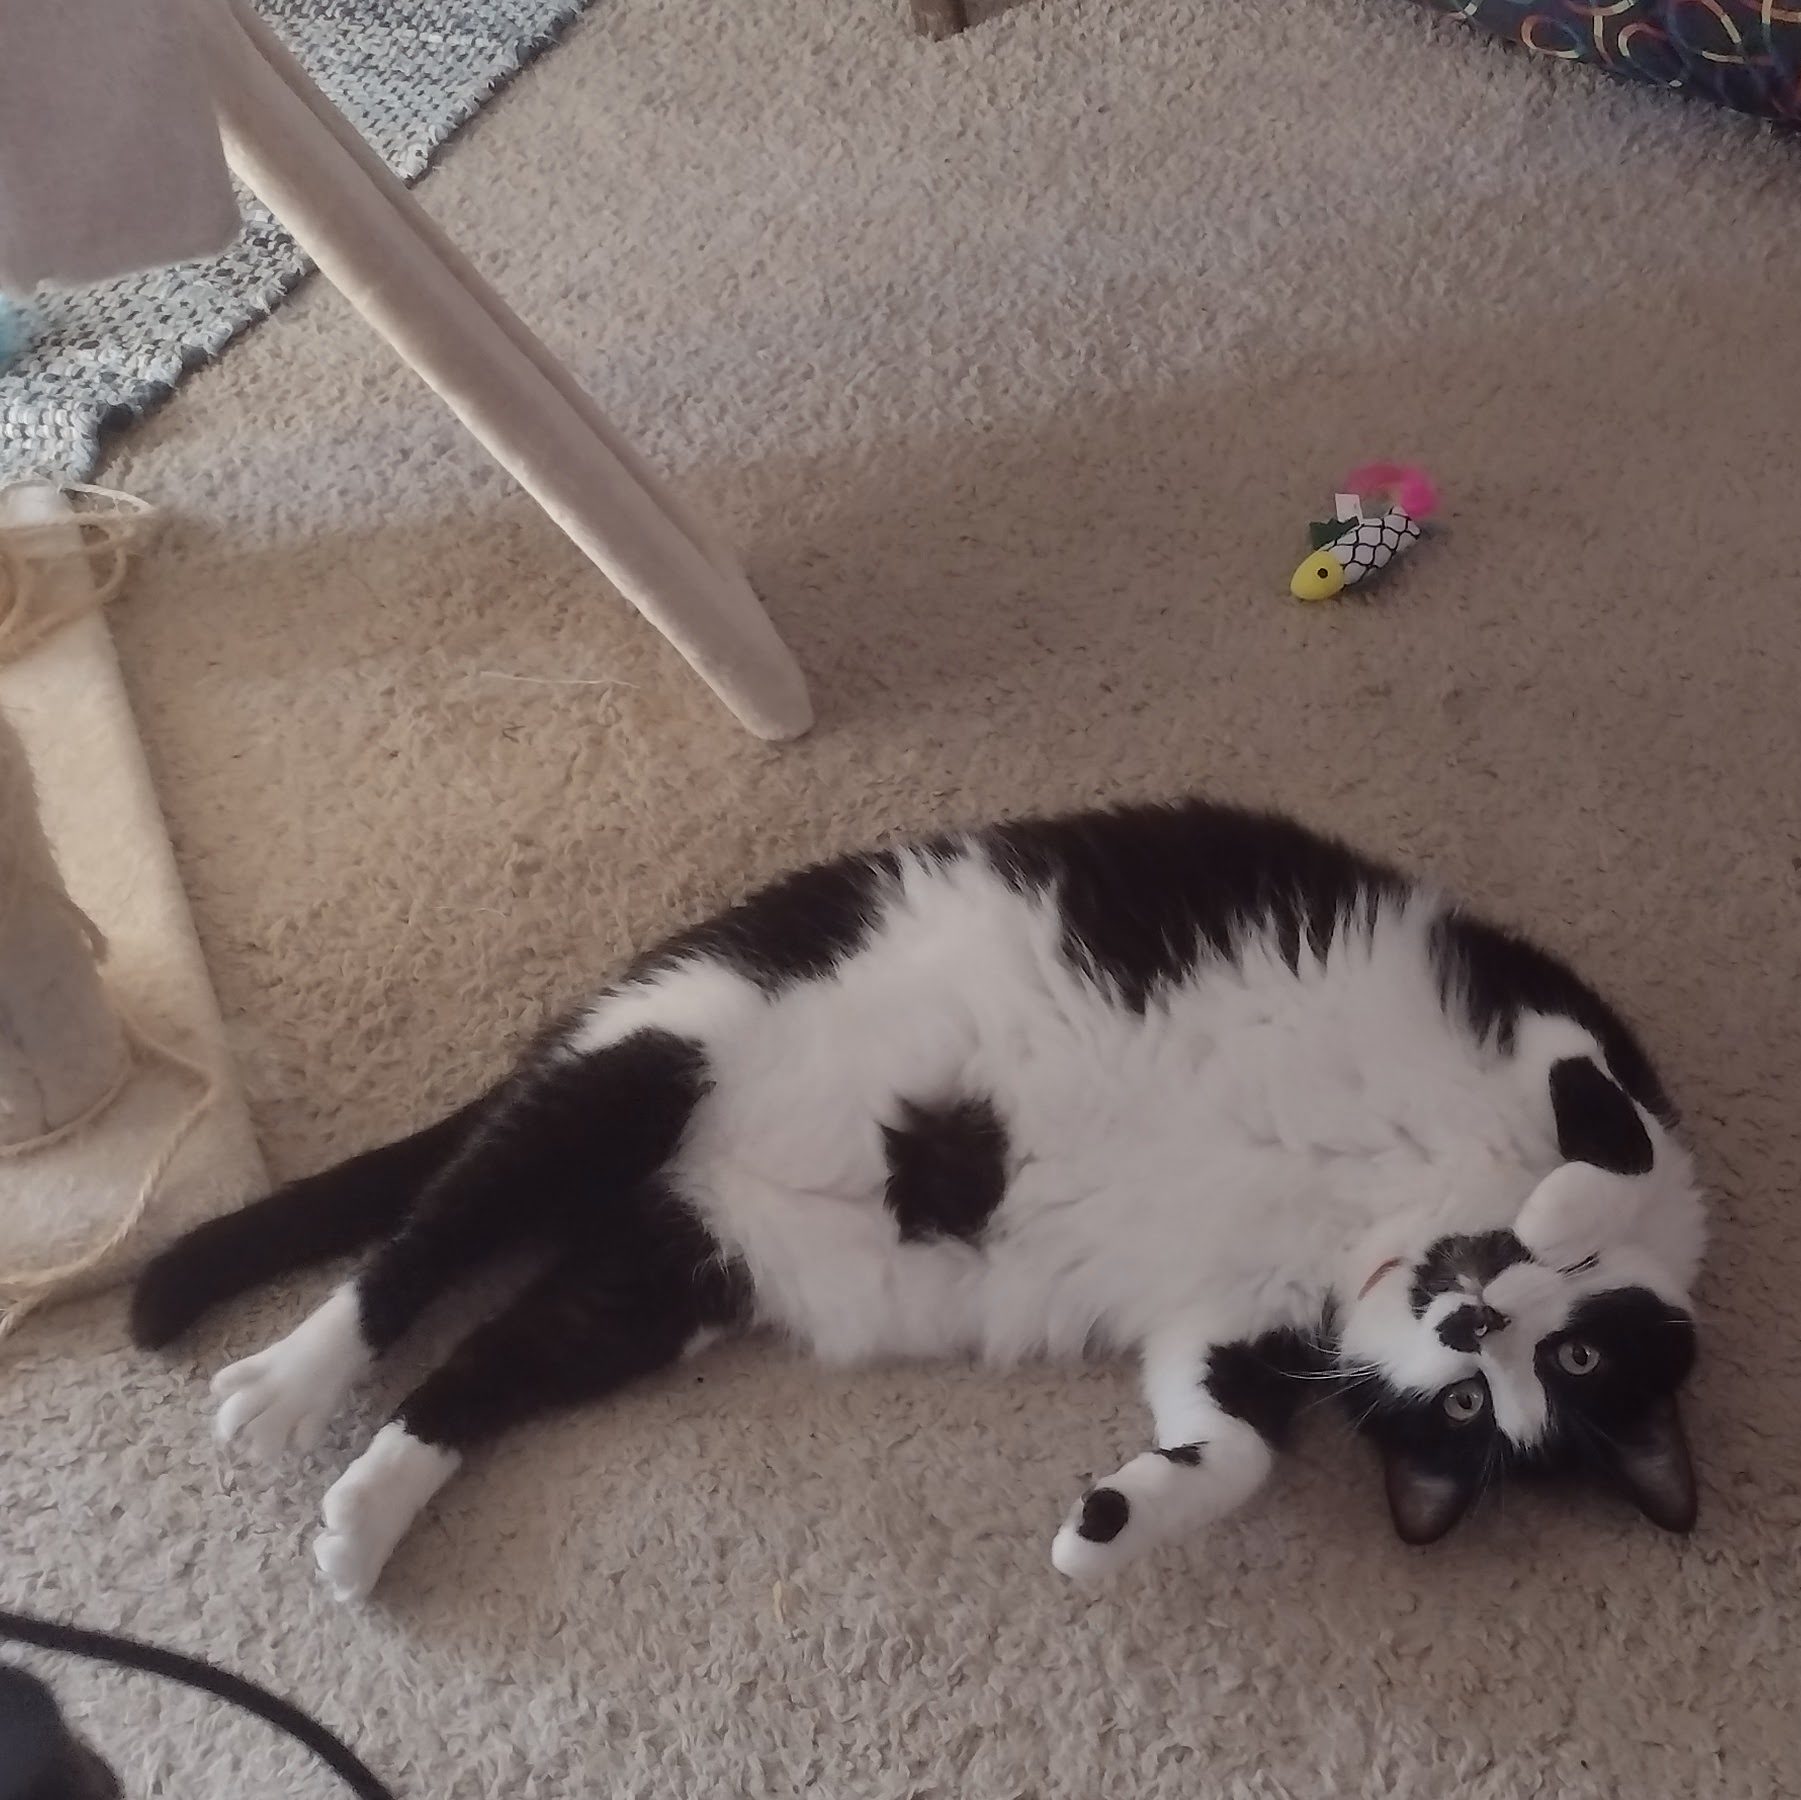 Kochanski, a black and white tuxedo cat lays on her back showing off her very fuzzy belly with its signature void spot. She looks very playful. There is also a toy fish on the floor beside her.